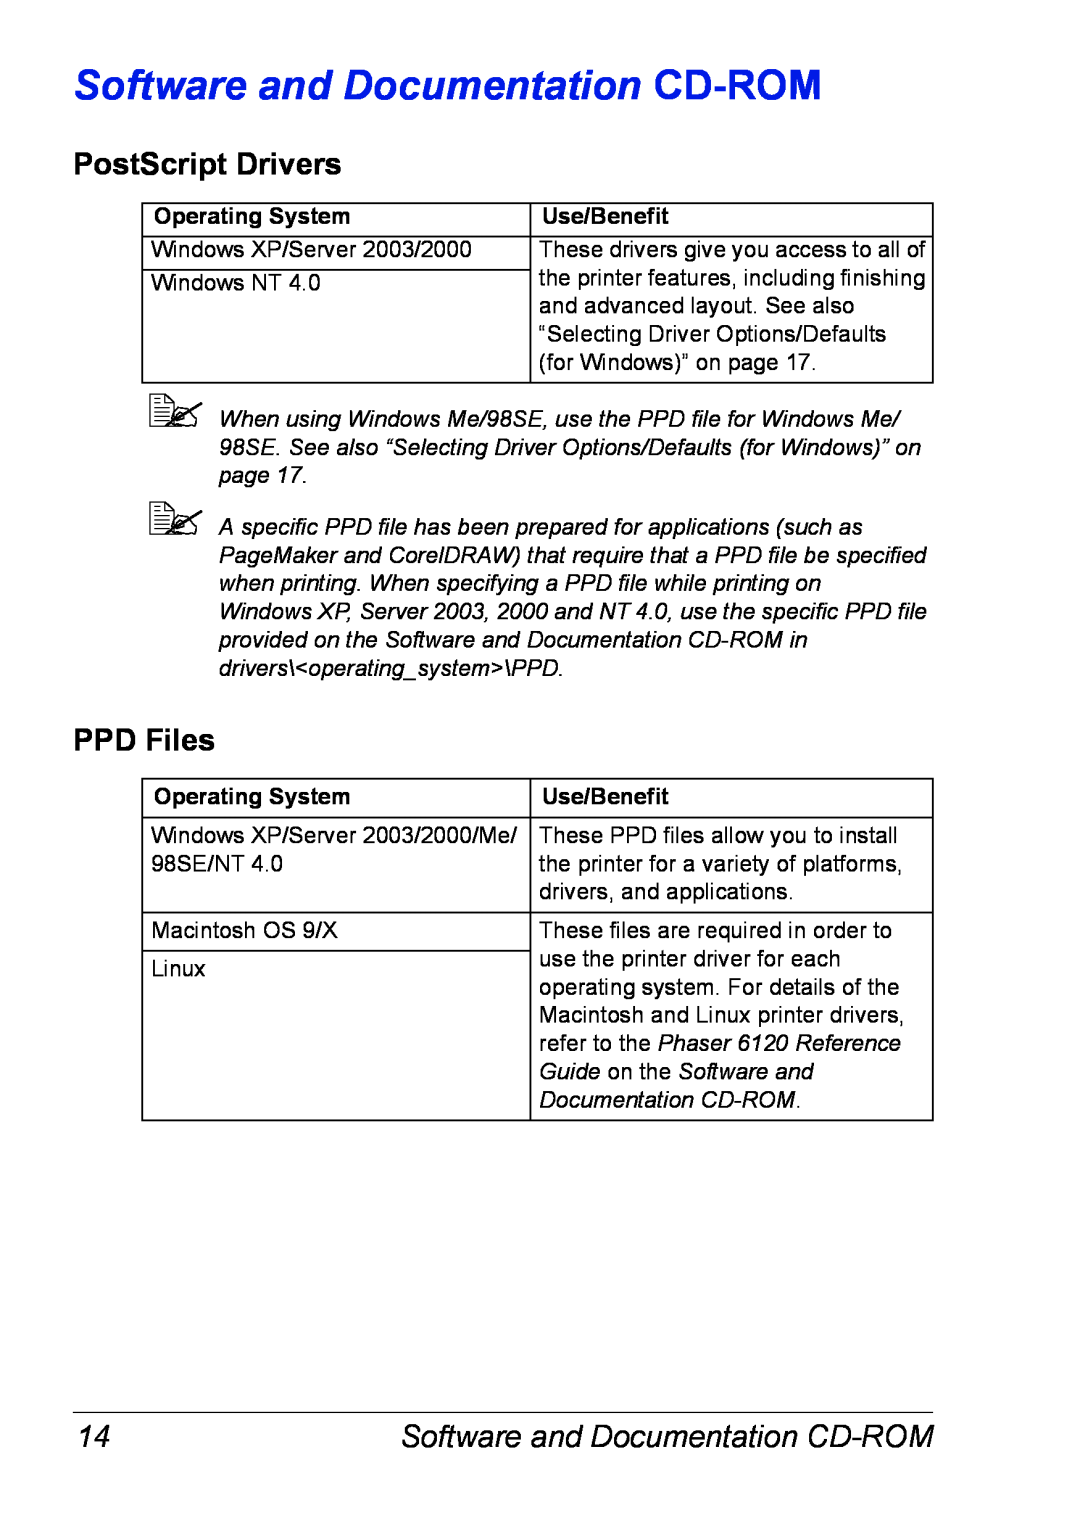 Xerox manual PostScript Drivers, PPD Files, Software and Documentation CD-ROM, refer to the Phaser 6120 Reference 